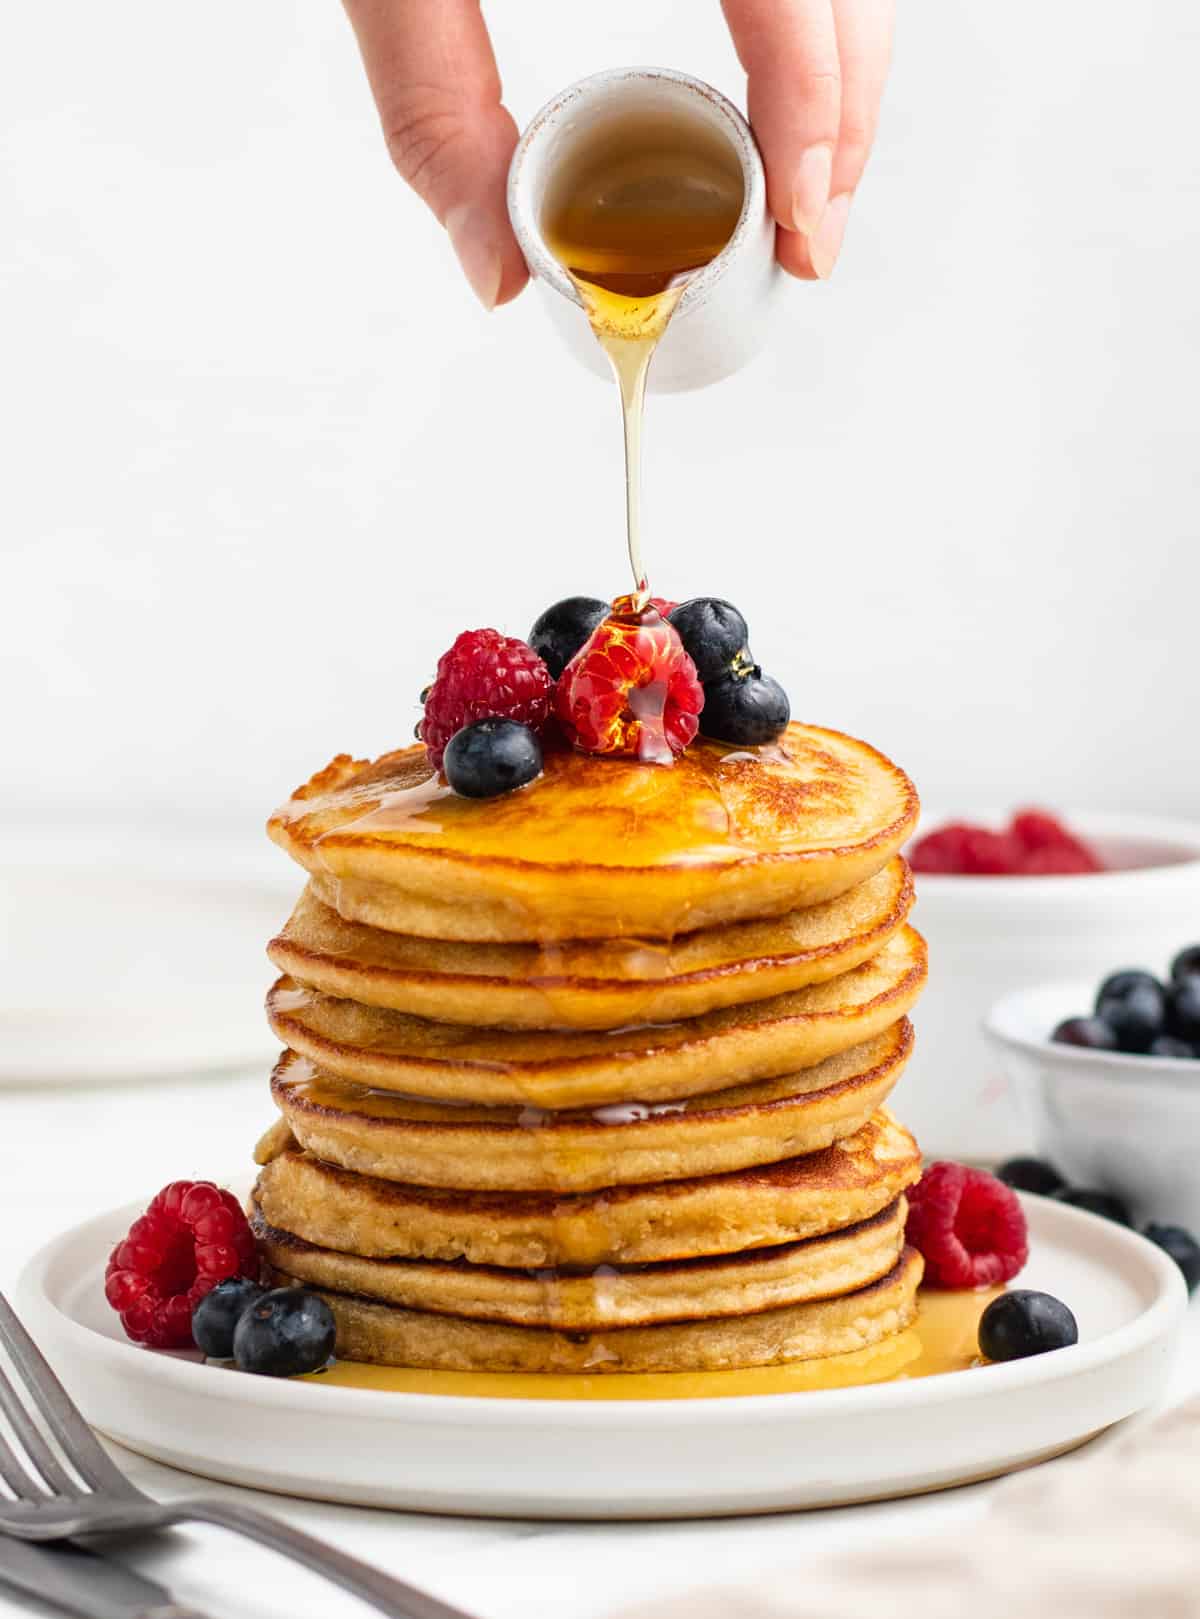 A stack of grain free pancakes topped with maple syrup and fresh berries on a white plate.